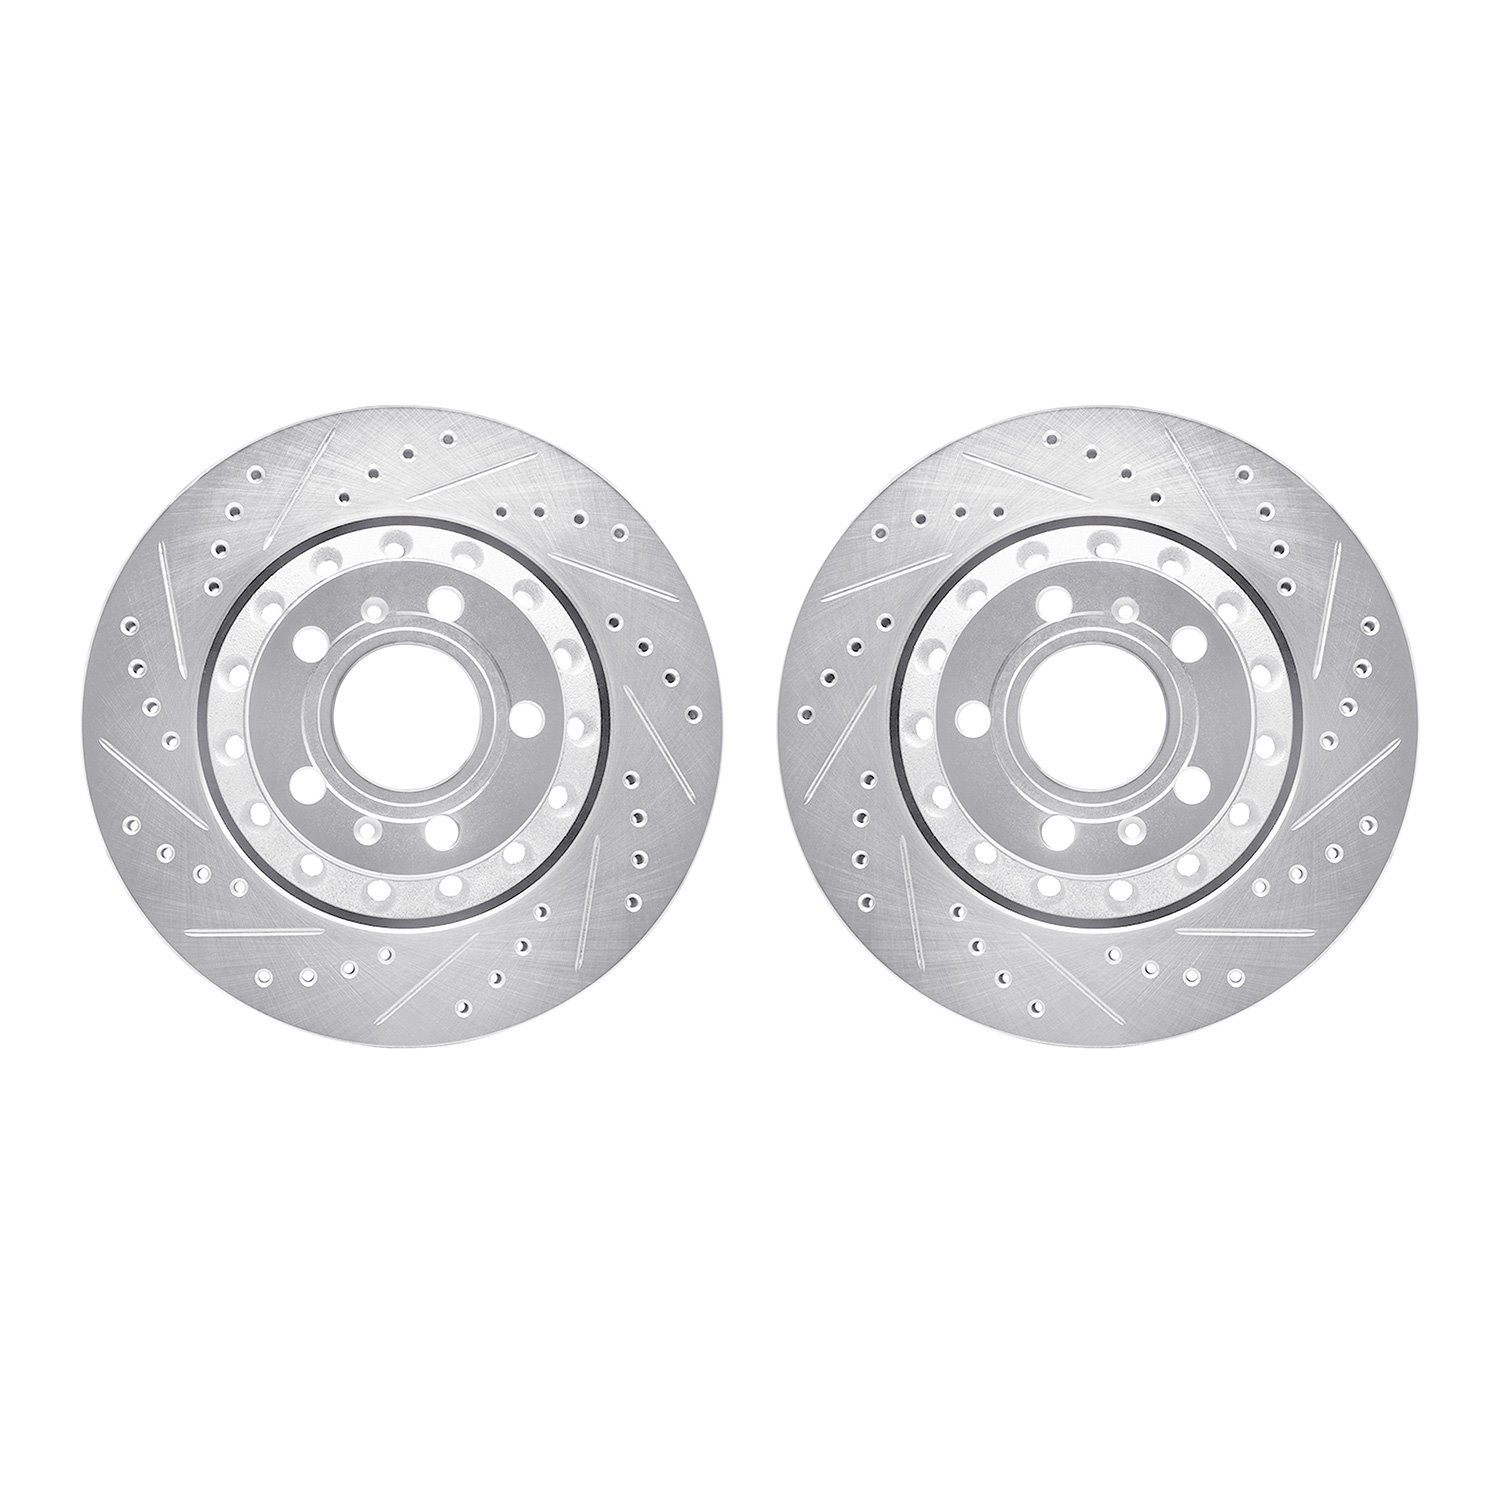 7002-73059 Drilled/Slotted Brake Rotors [Silver], 2004-2010 Audi/Volkswagen, Position: Rear